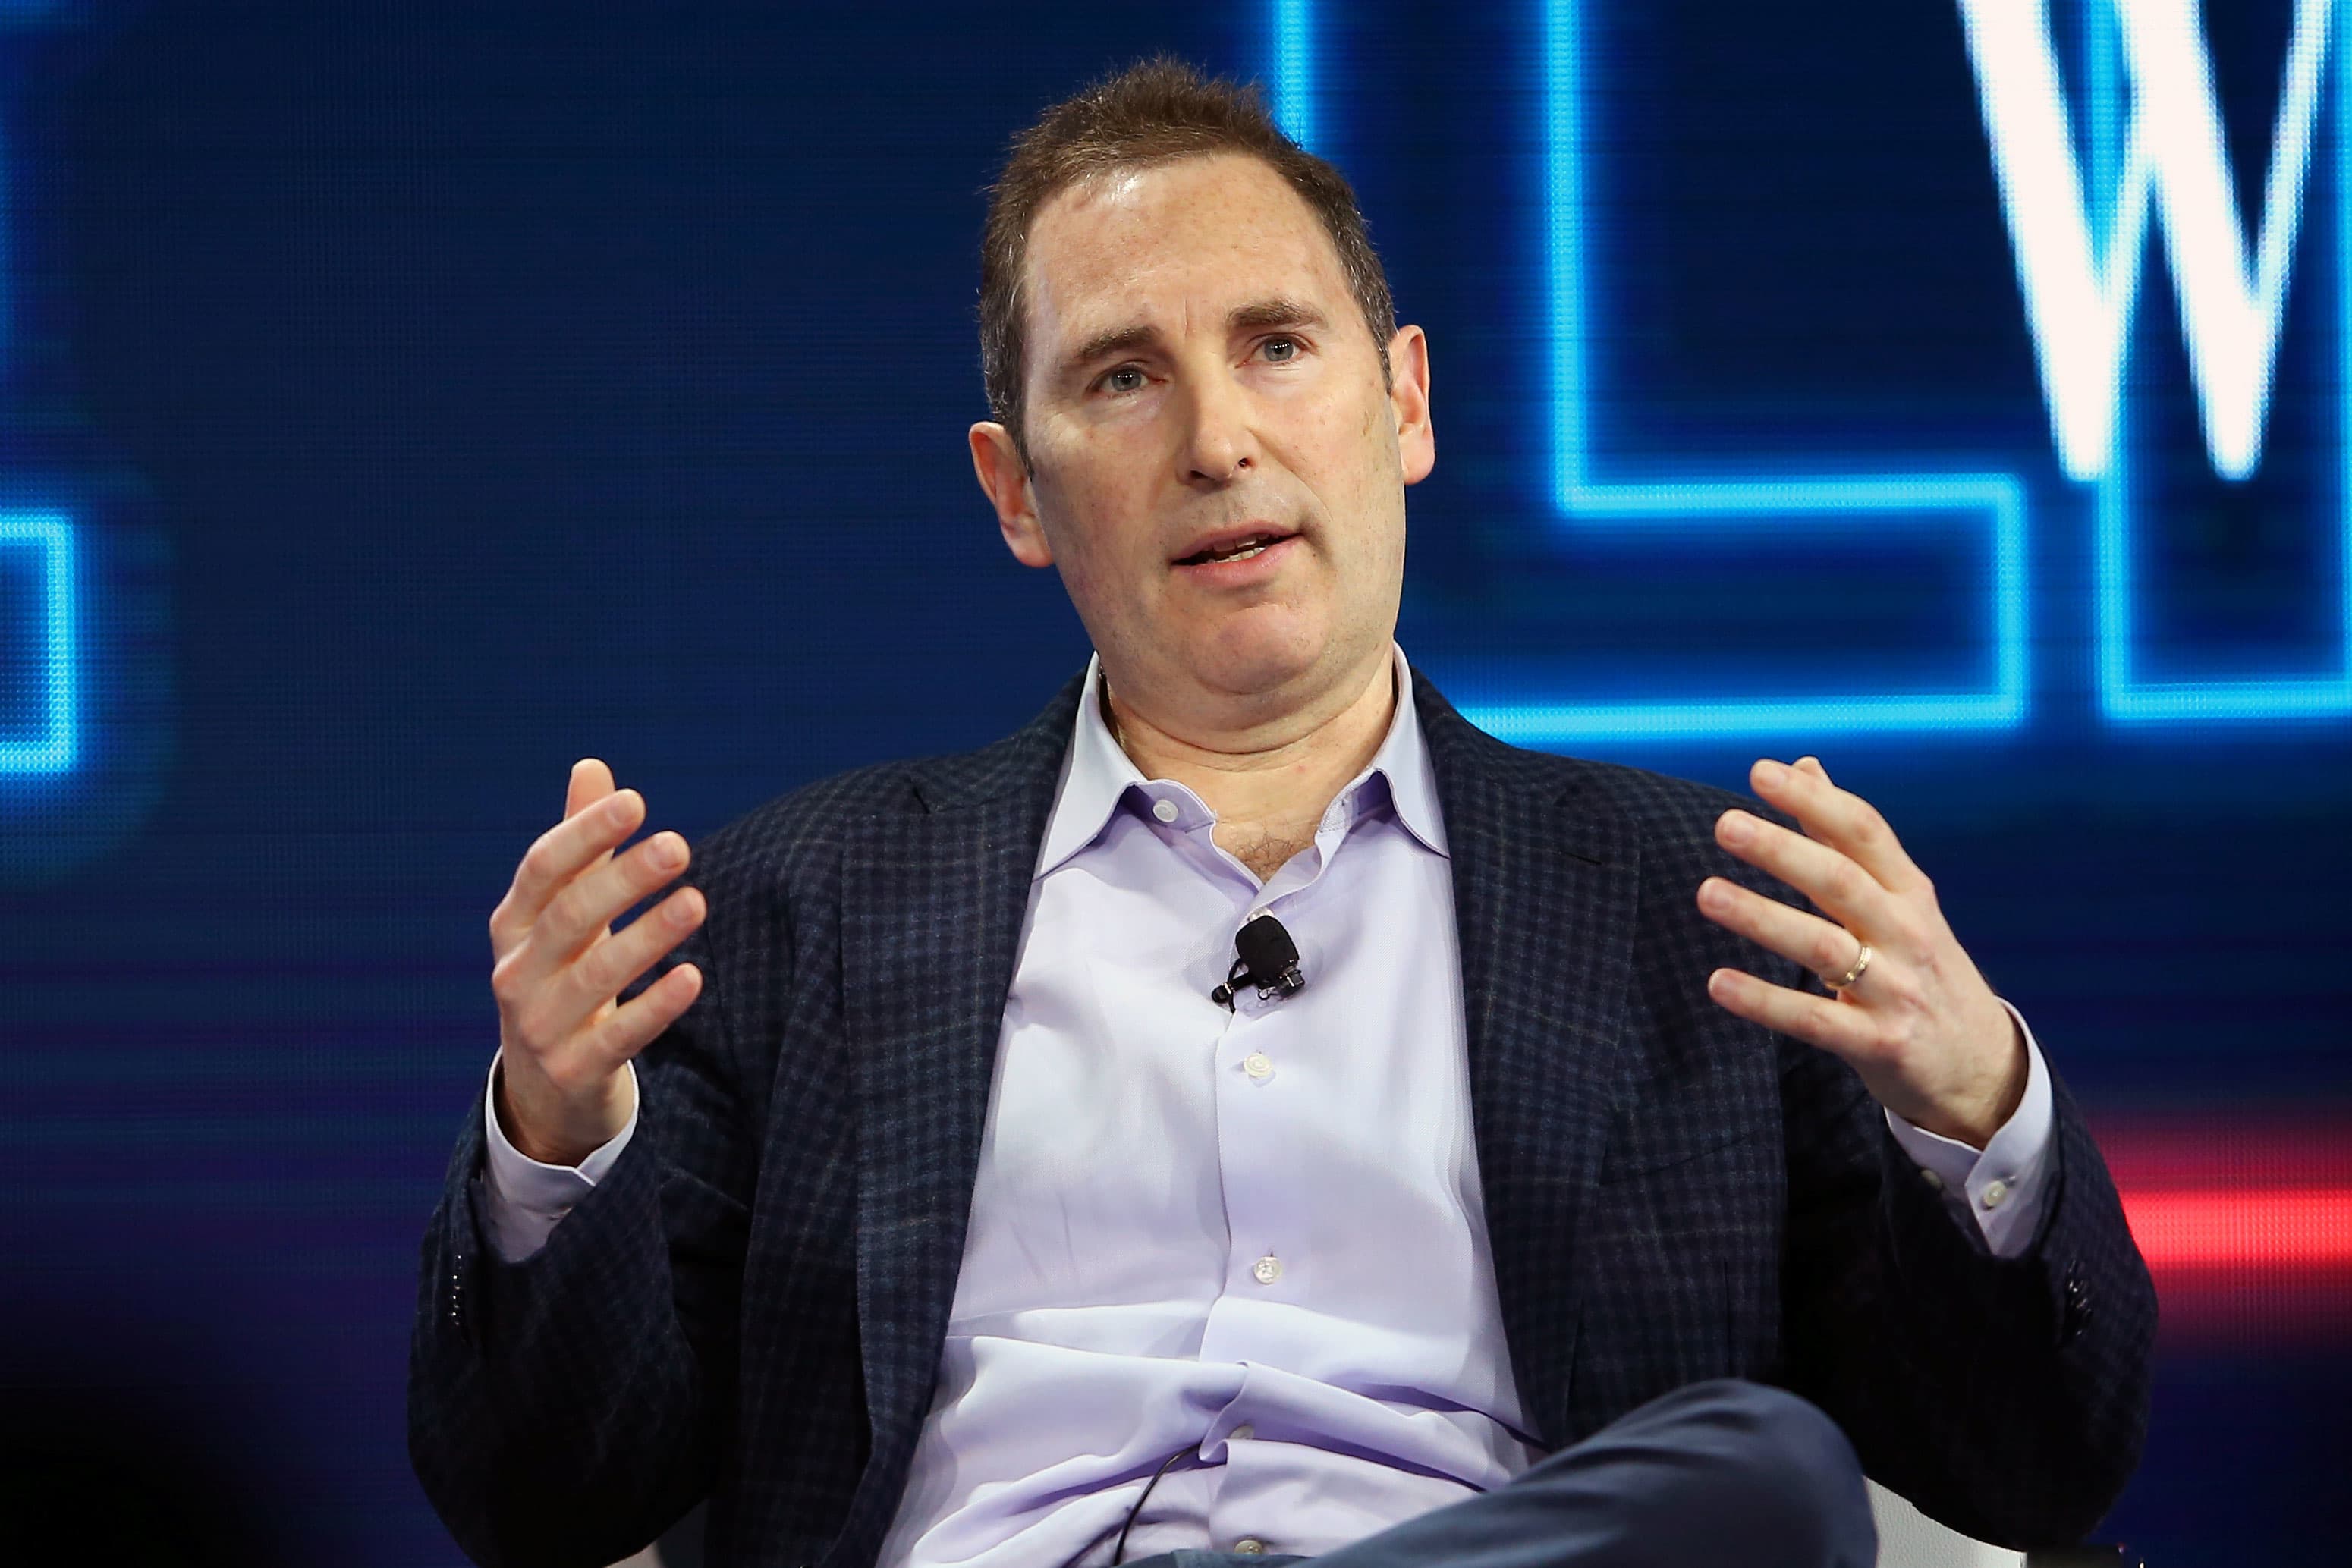 Andy Jassy, CEO of Amazon and then CEO of Amazon Web Services, speaks at the WSJD Live conference in Laguna Beach, California, October 25, 2016.